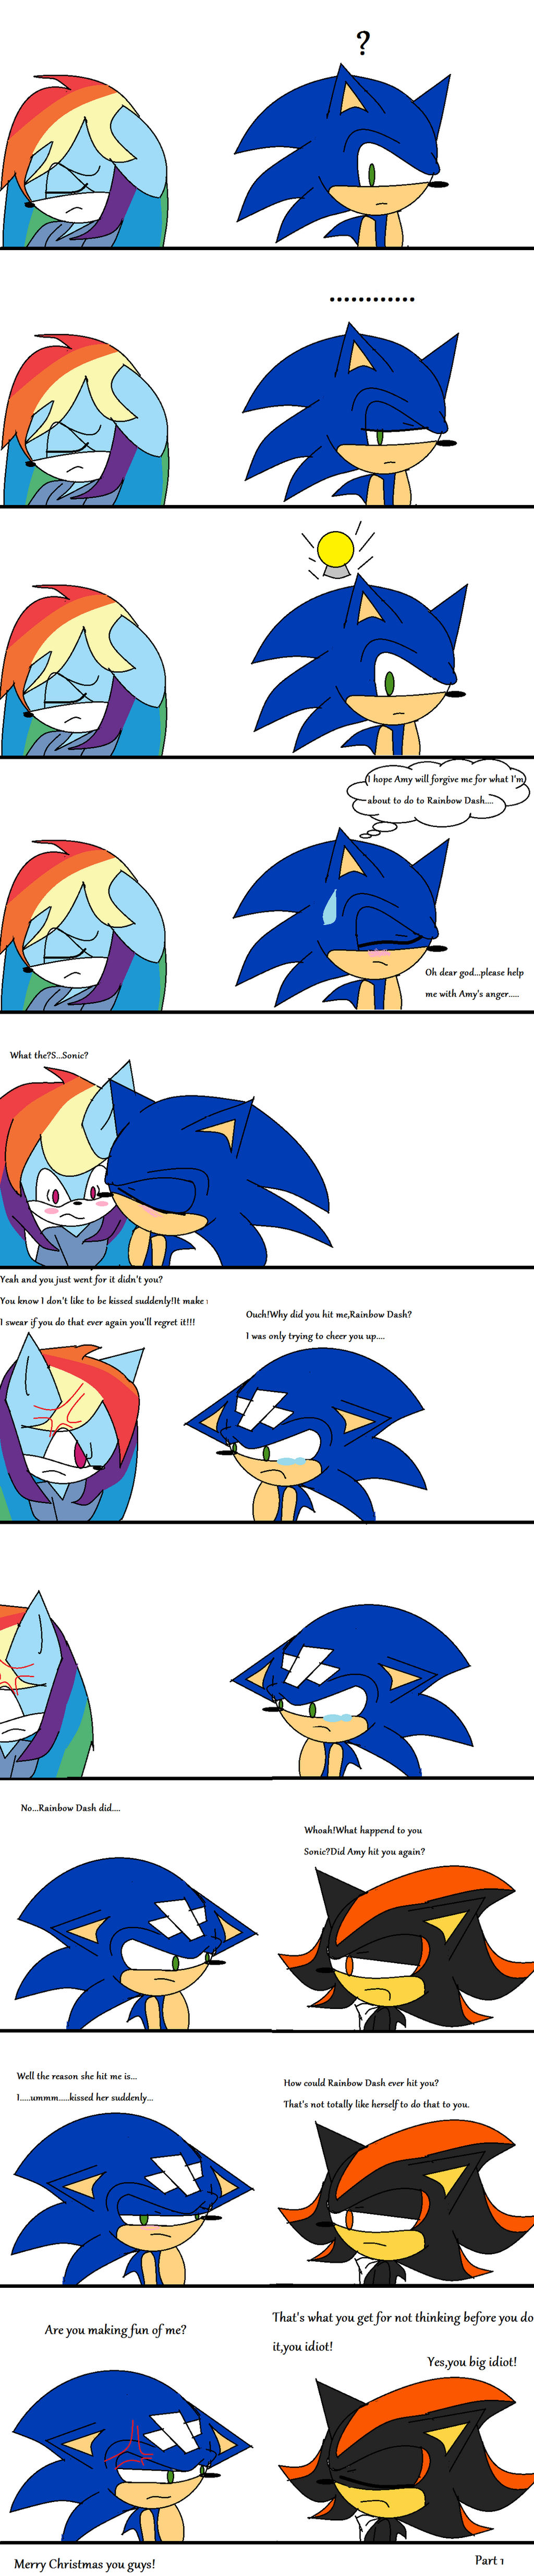 Sonic gets hit by Rainbow Dash